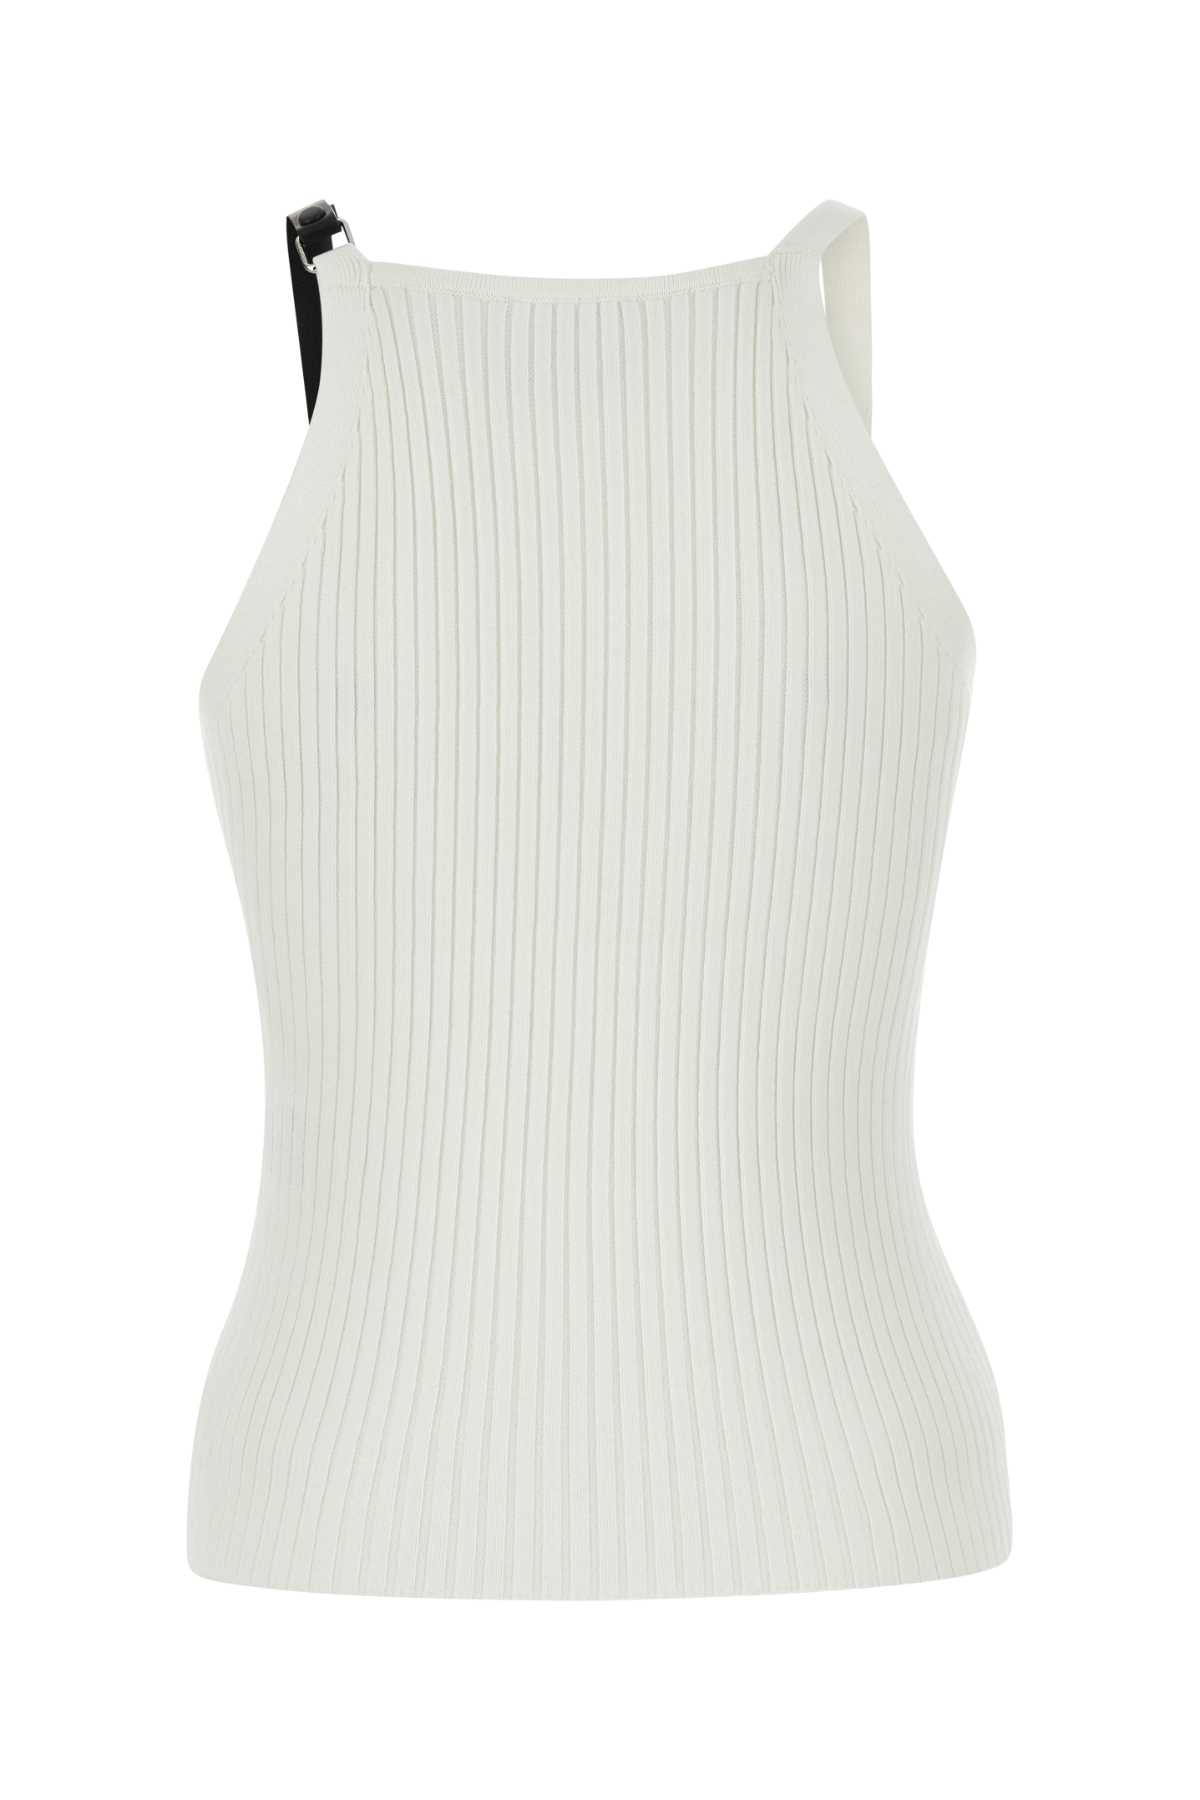 Courrèges White Viscose Blend Top In Heritagewhite